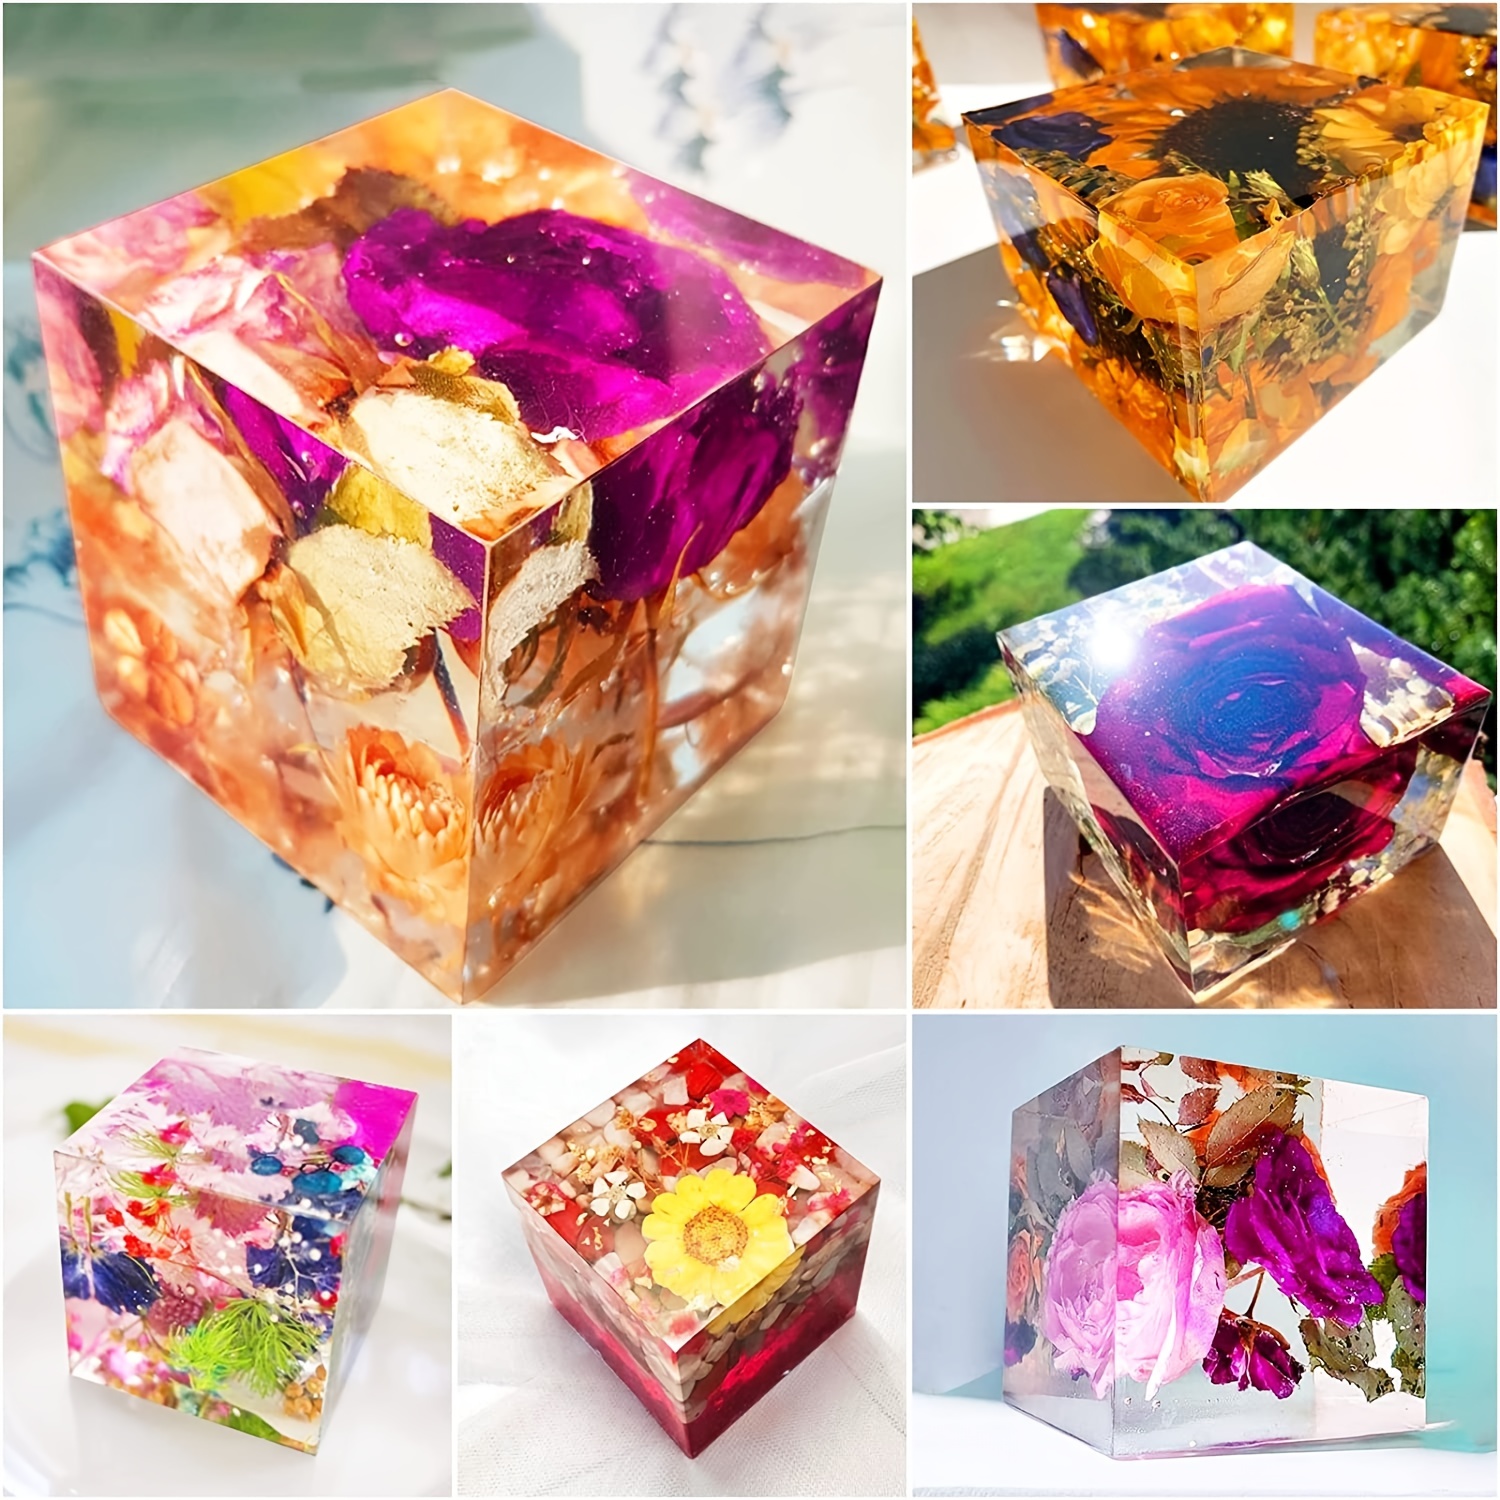 Luckkyme Resin Casting Molding Square Resin Mold Cube Silicone